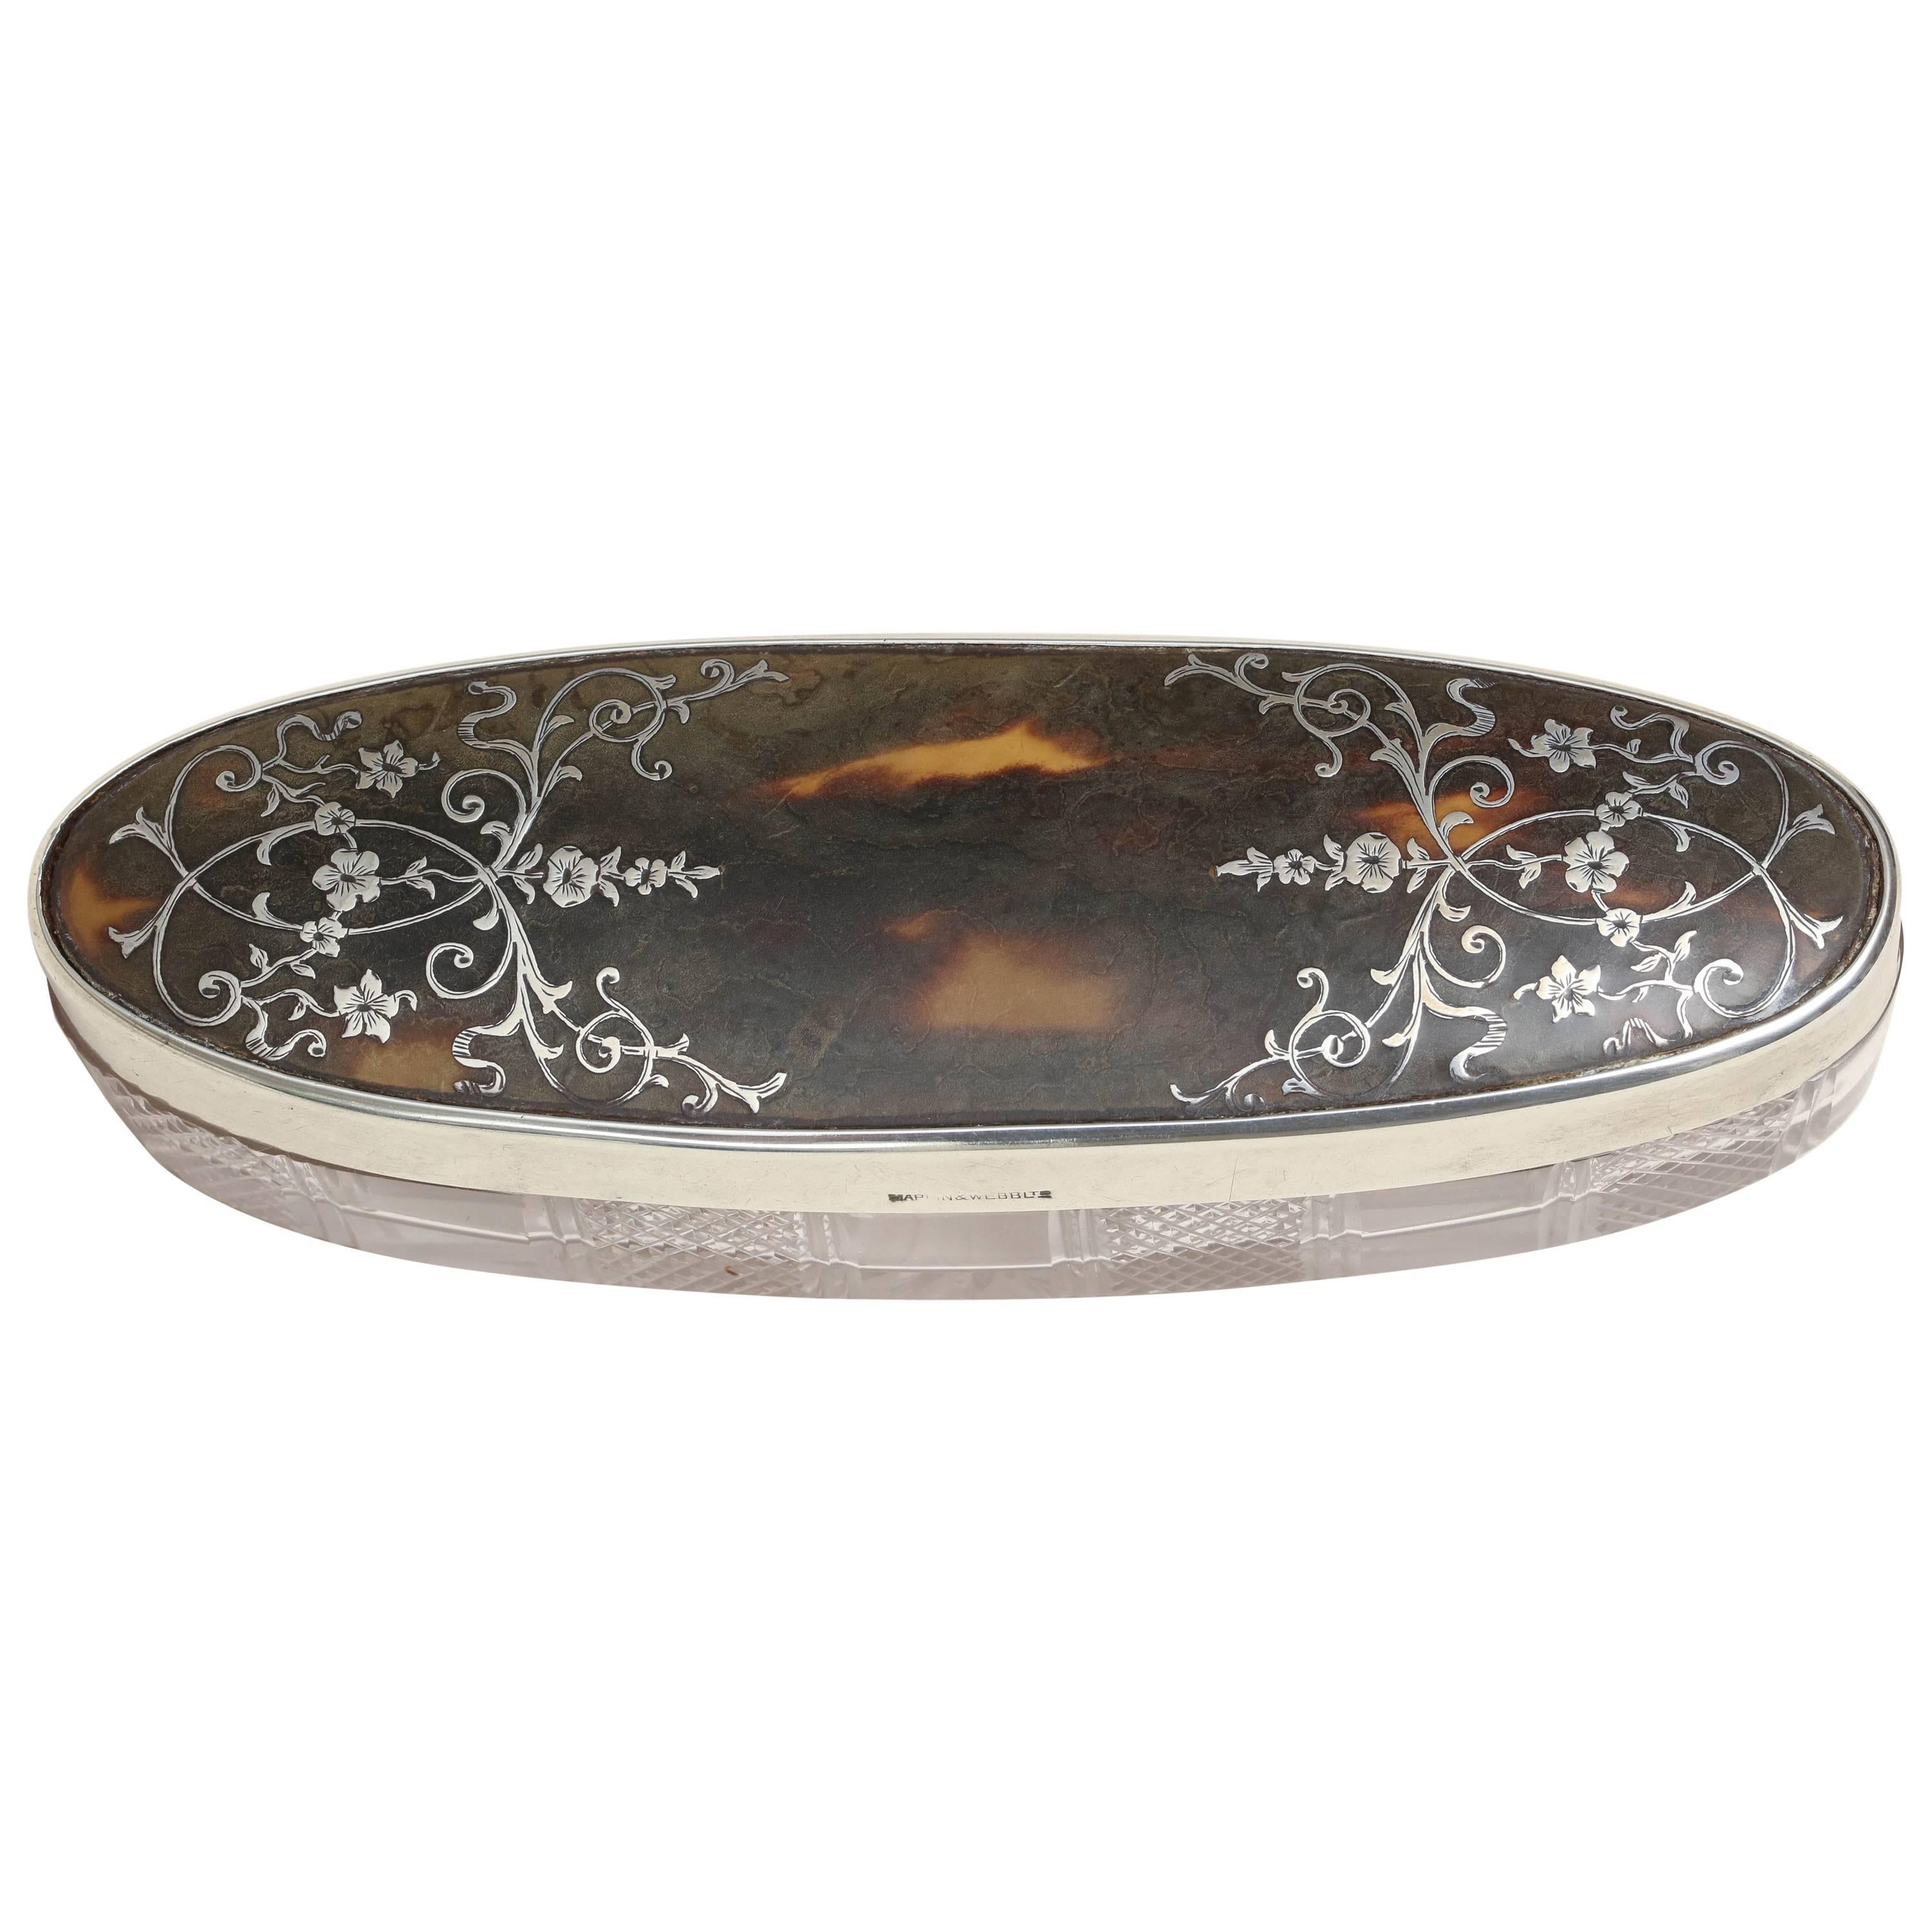 English Art Deco Crystal, Faux Tortoiseshell and Sterling Silver Pique Box